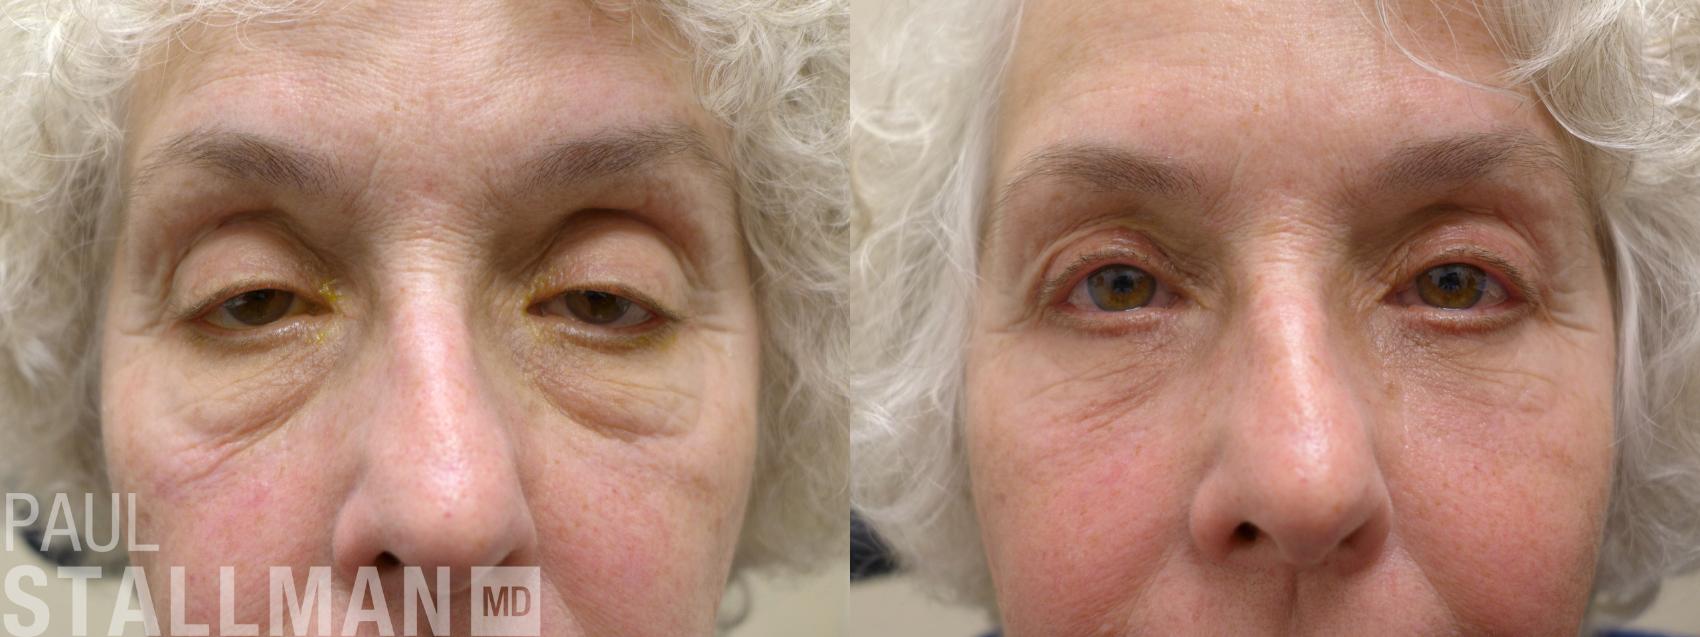 Before & After Blepharoplasty for Women Case 171 Front View in Fresno, Santa Maria, San Luis Obispo, CA